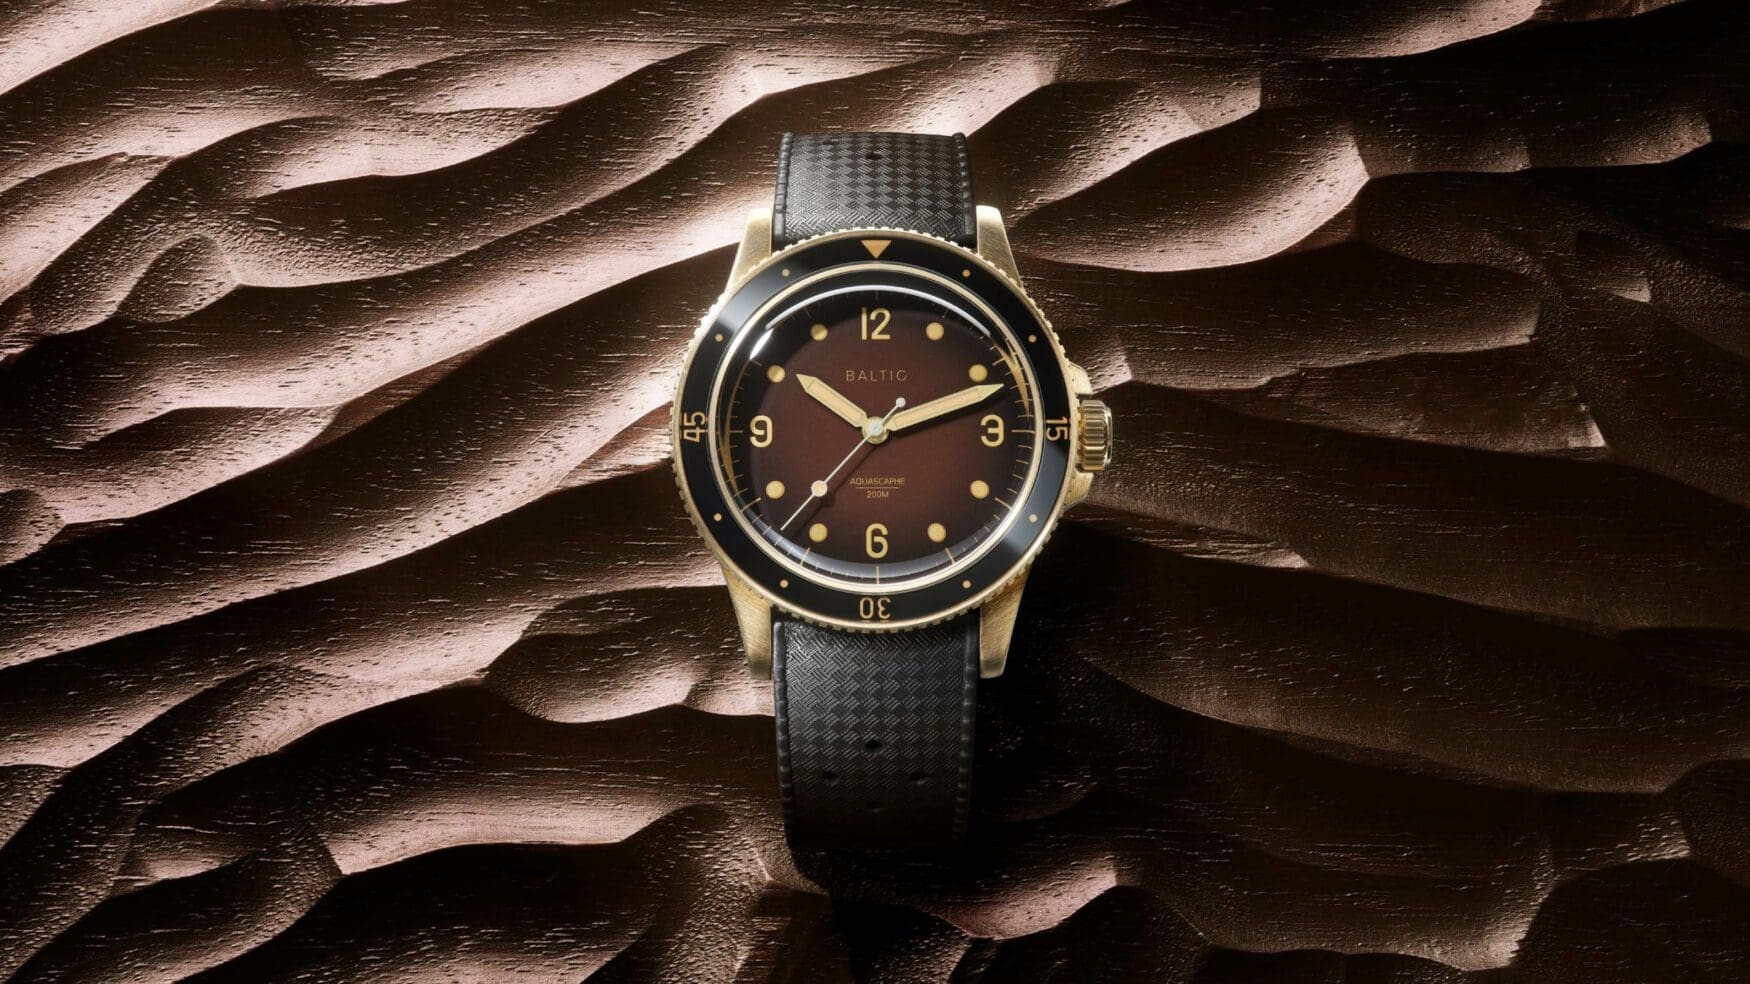 The Baltic Aquascaphe Bronze Brown is another vintage-inspired hit for a price that’s too good to be true